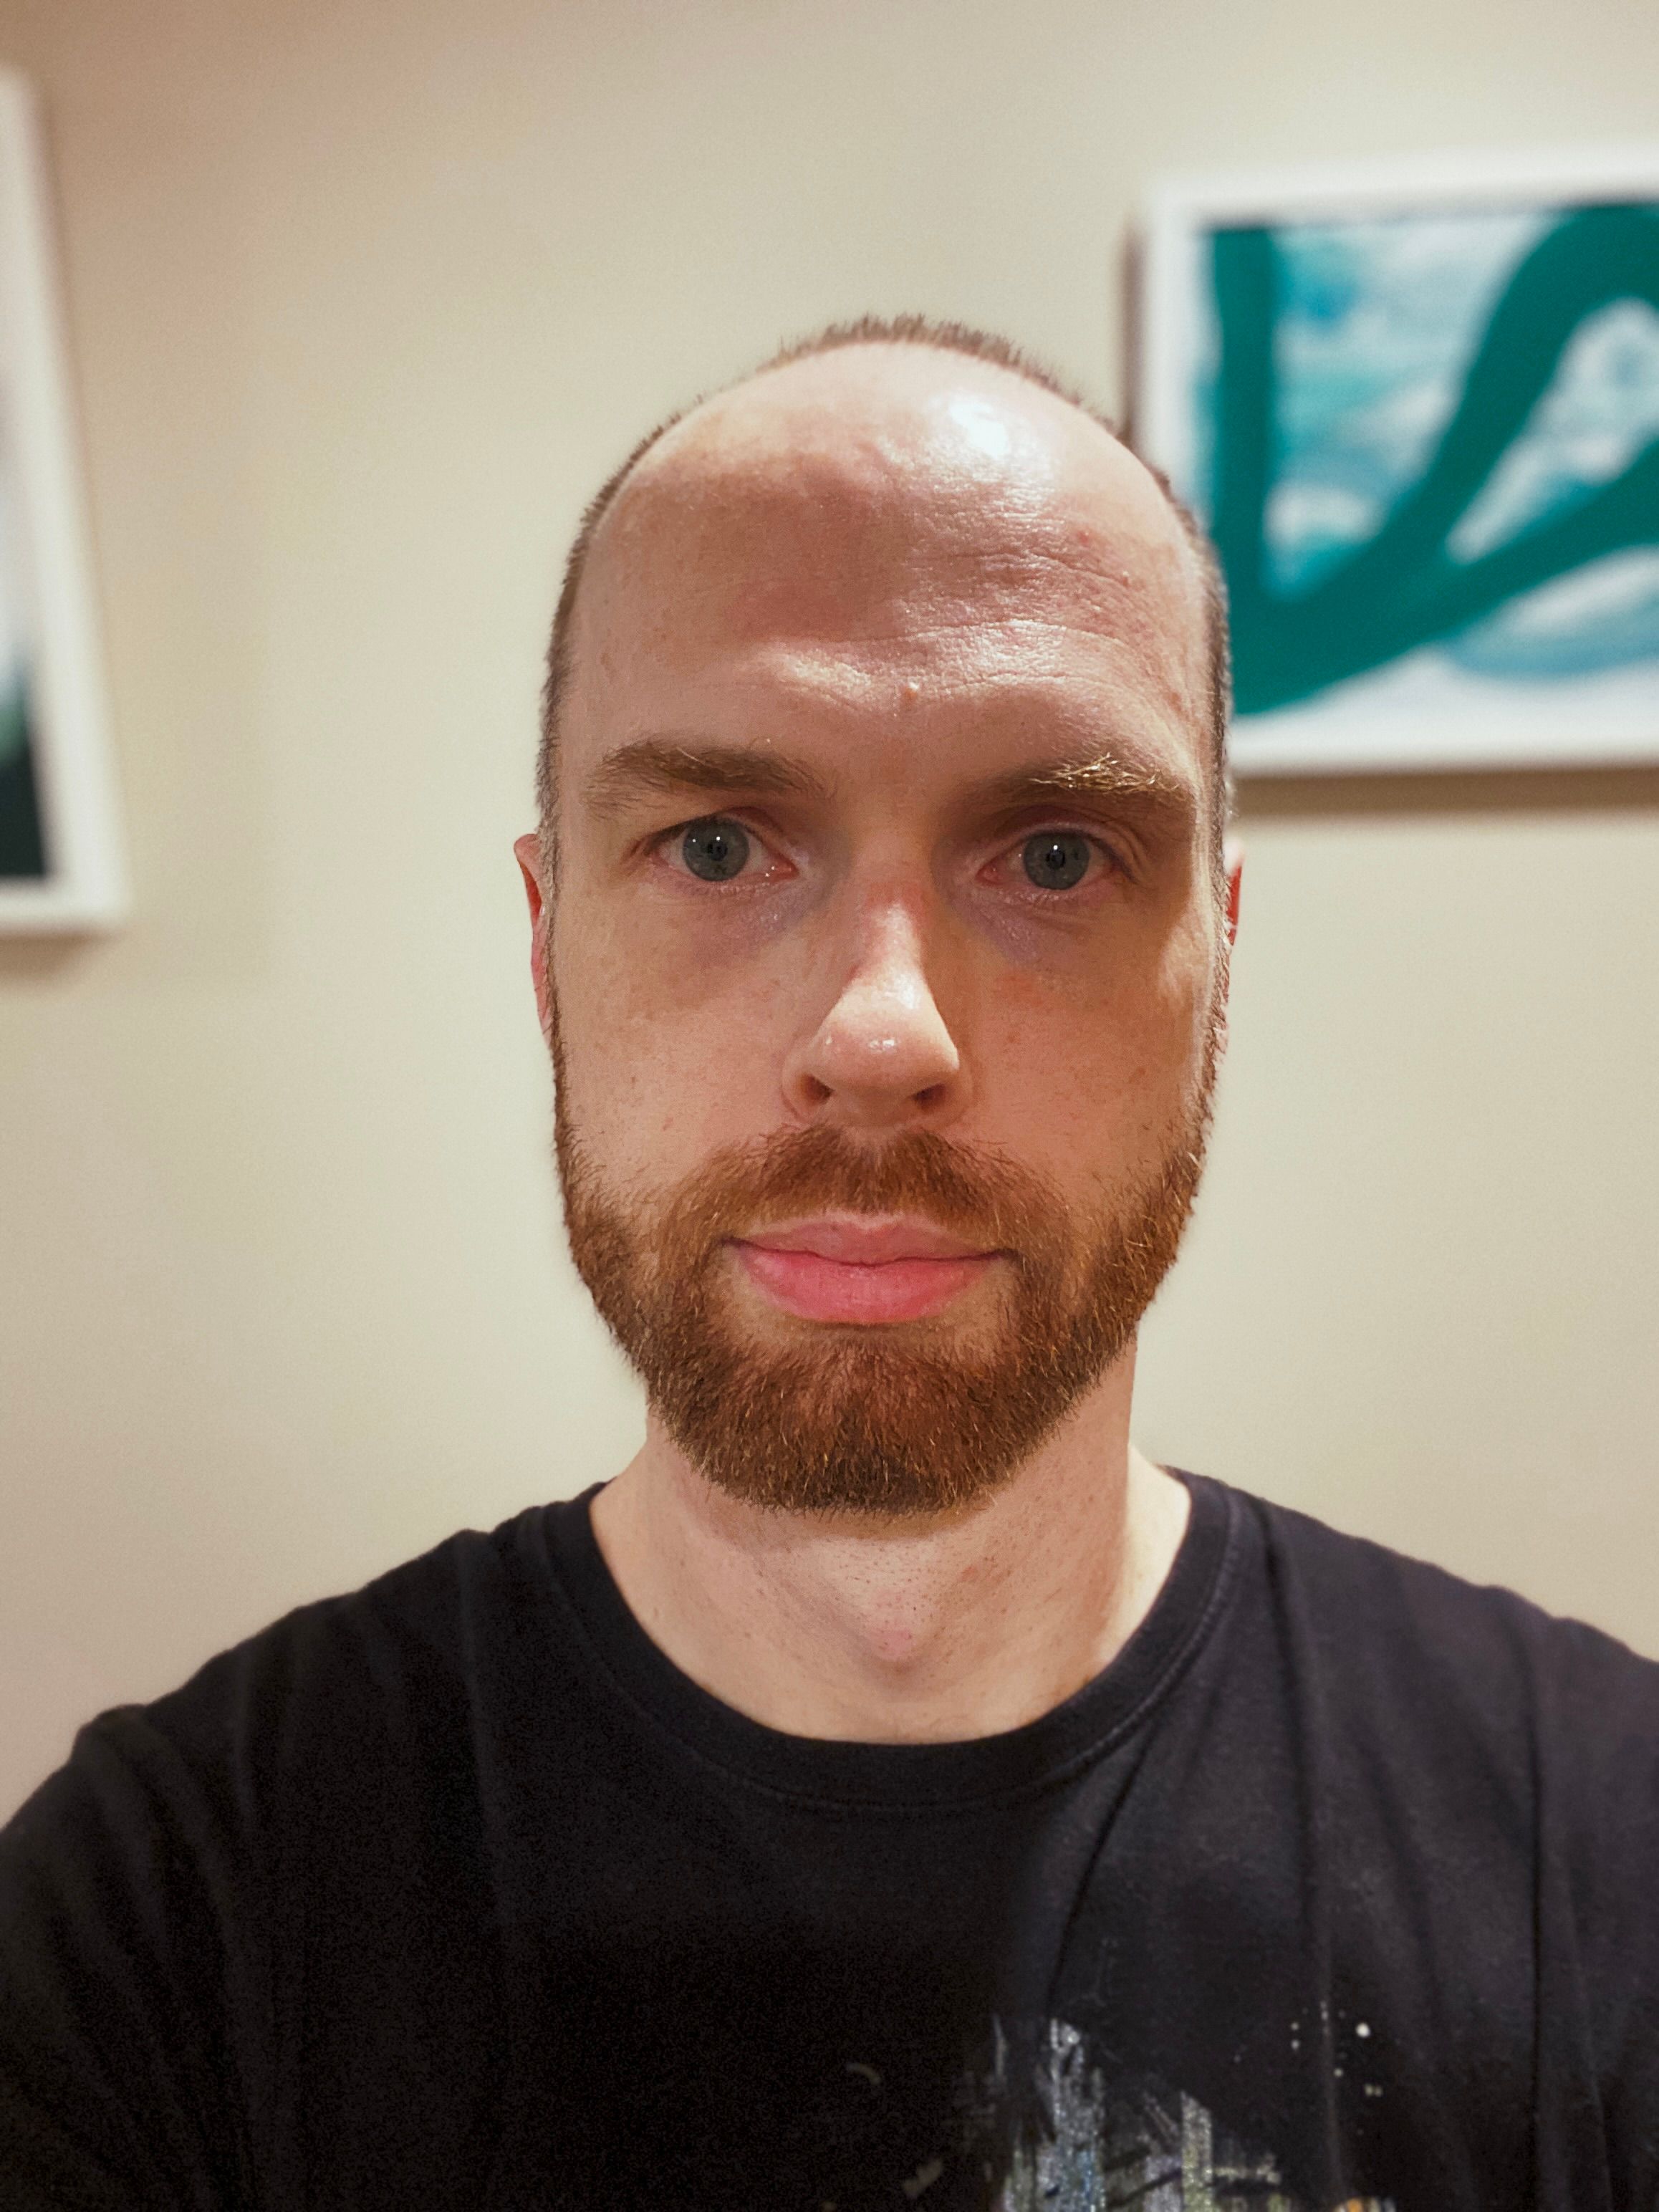 Me again, but this time the hair and beard have been gone over with a #2 razor attachment and it's all wonderfully short and neat.